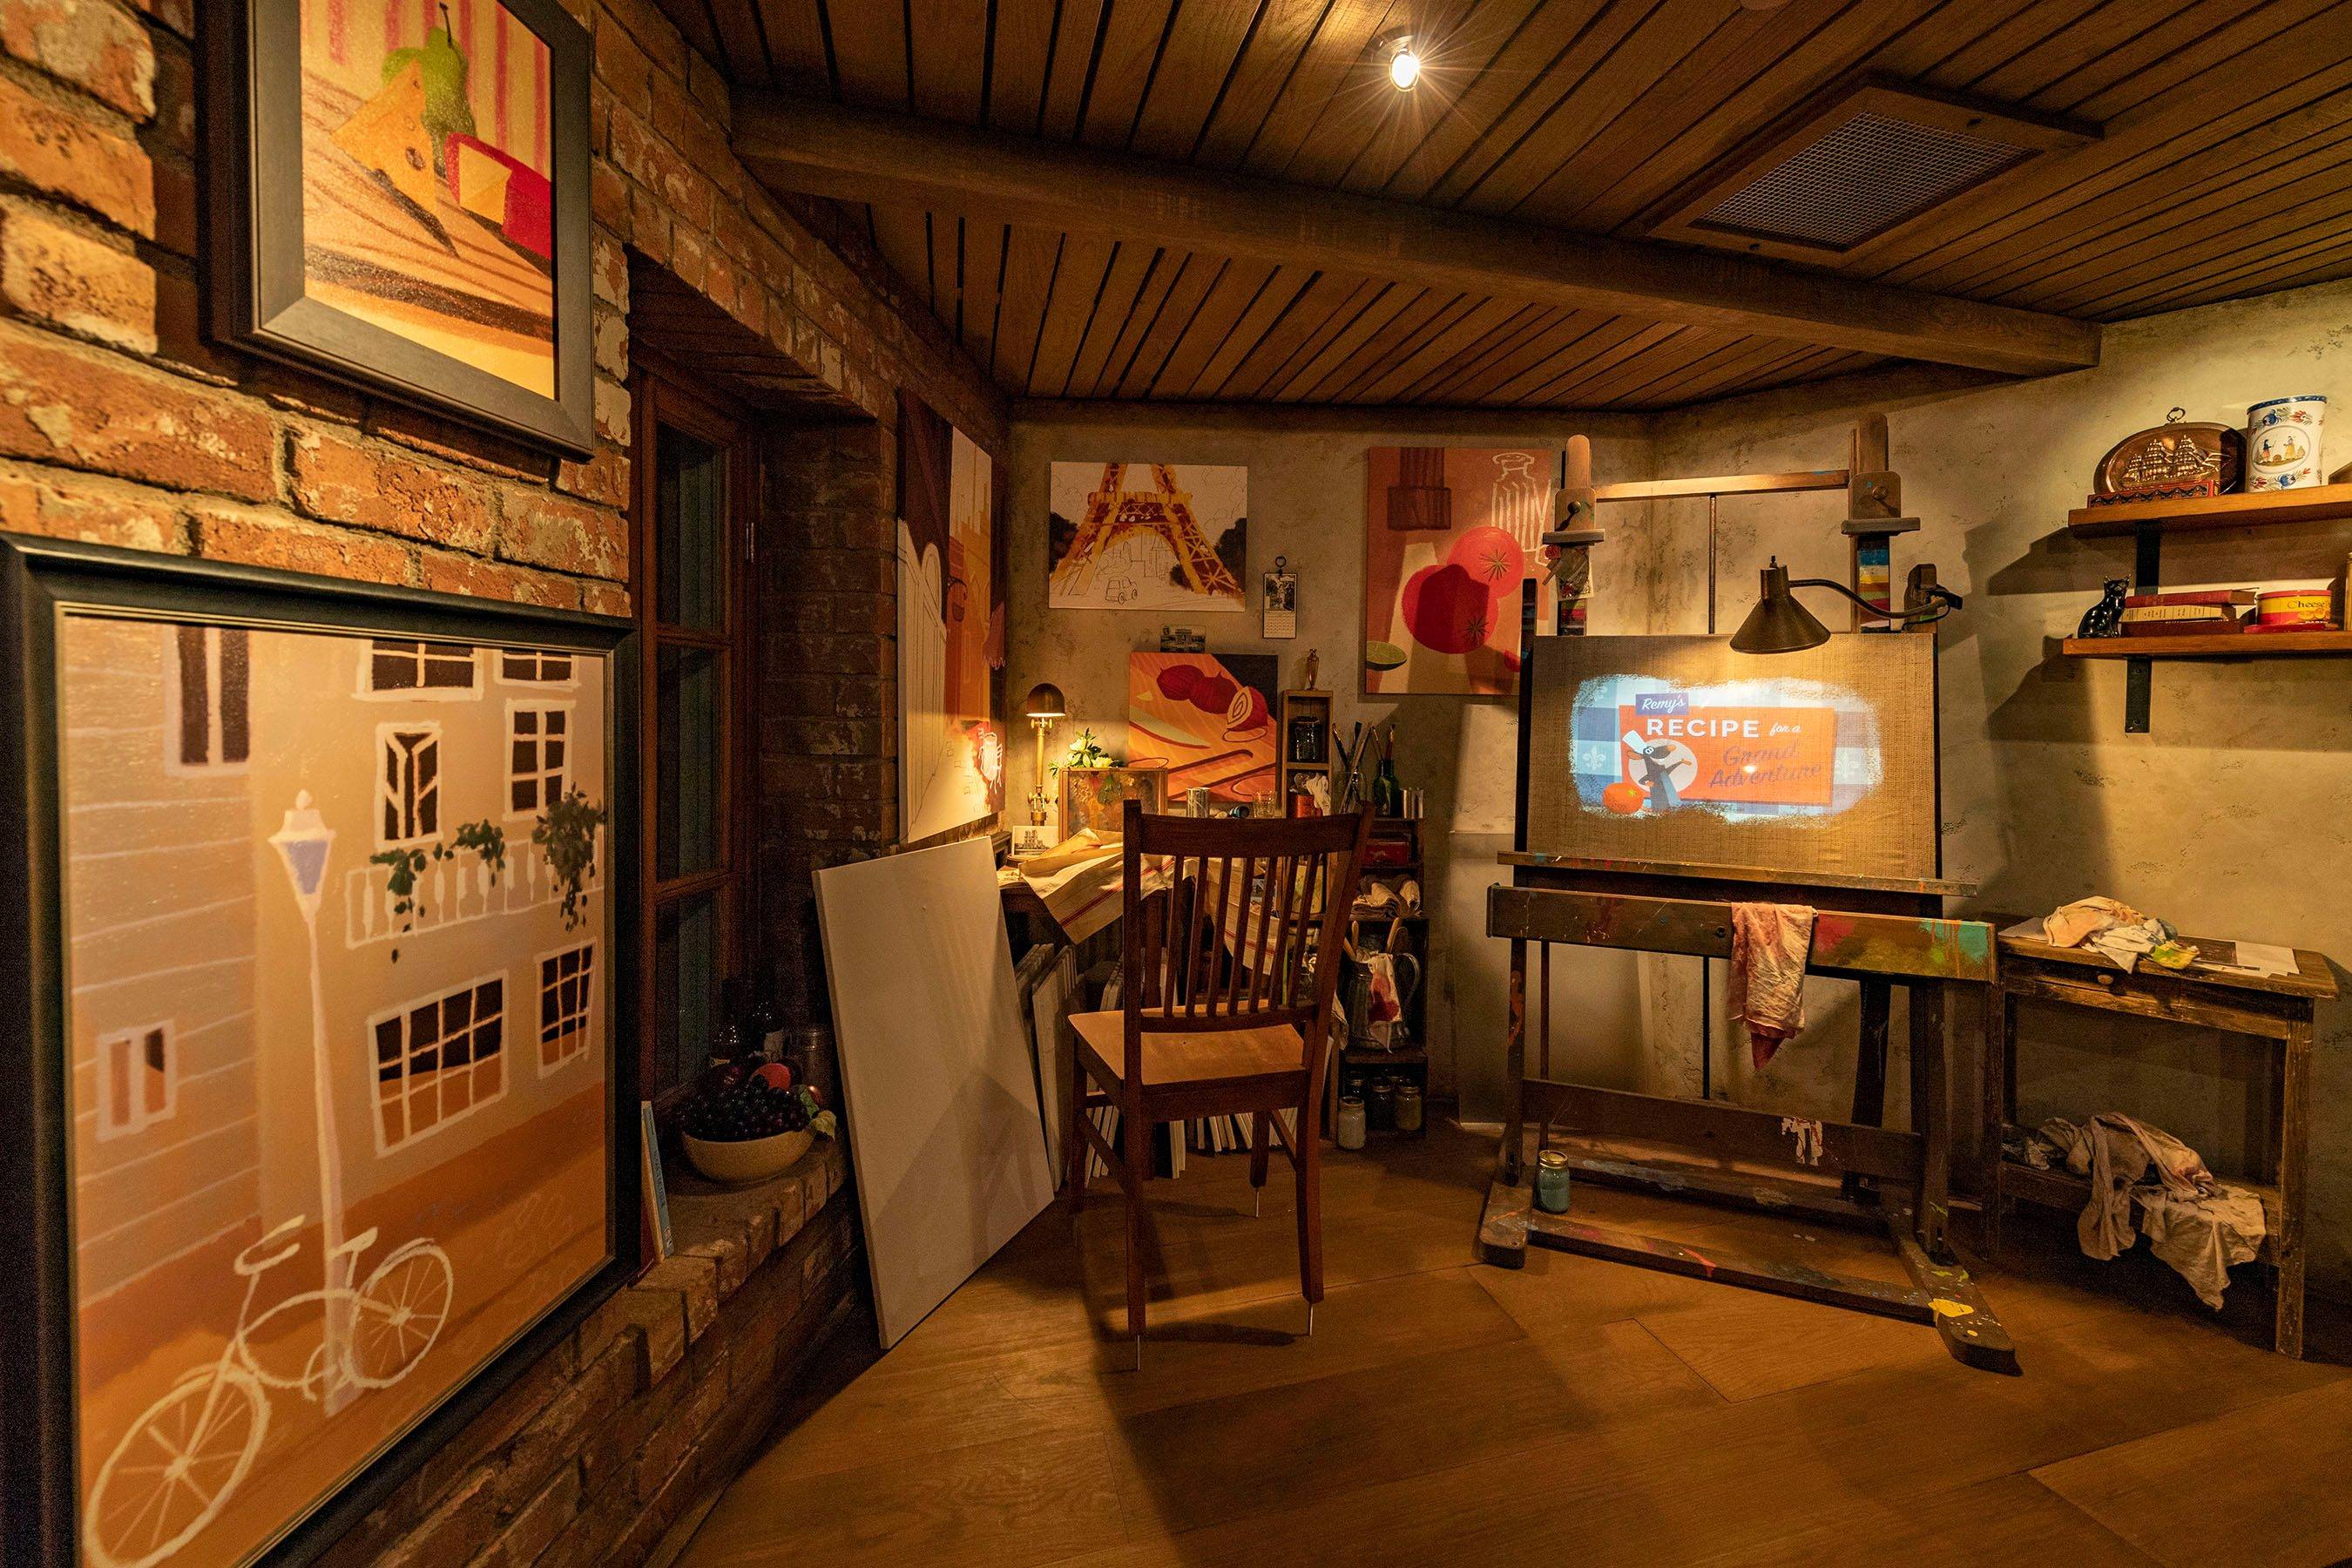 Guests enter a French artist’s loft featuring French-inspired paintings, cupboards filled with art supplies and two magical canvases that come to life in the queue for Remy’s Ratatouille Adventure